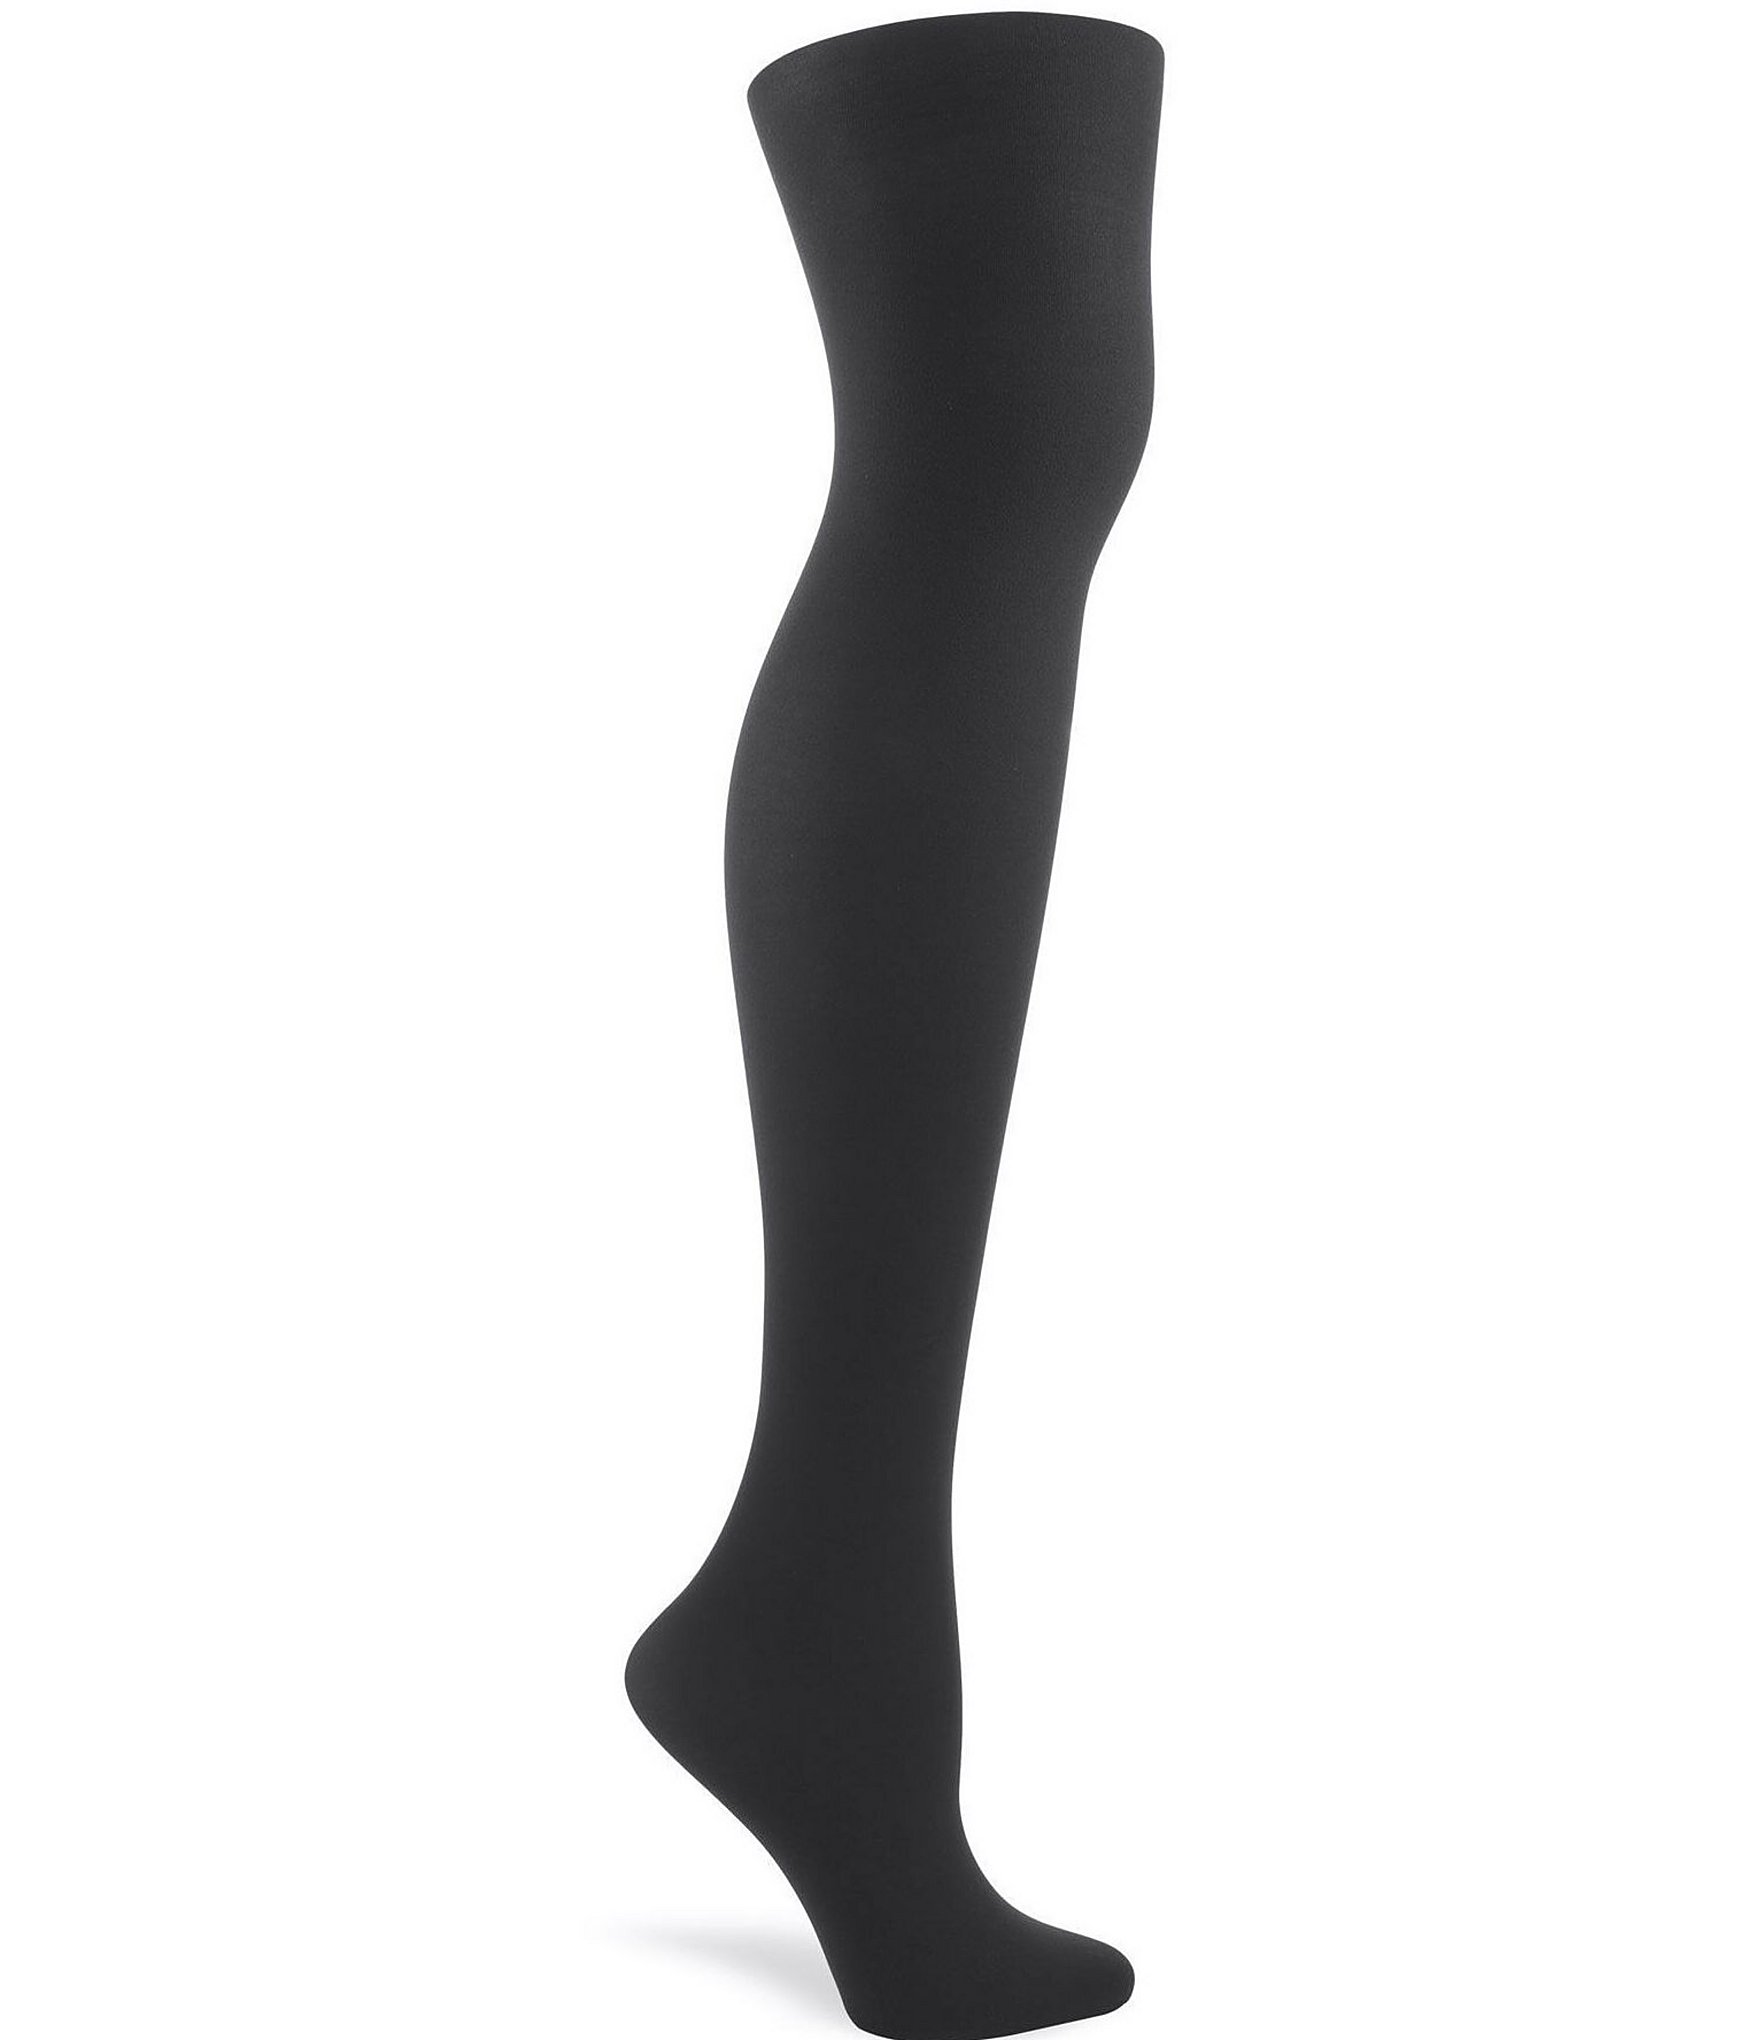 Hipstik Women's Opaque Tights, Comfortable, Lace Top